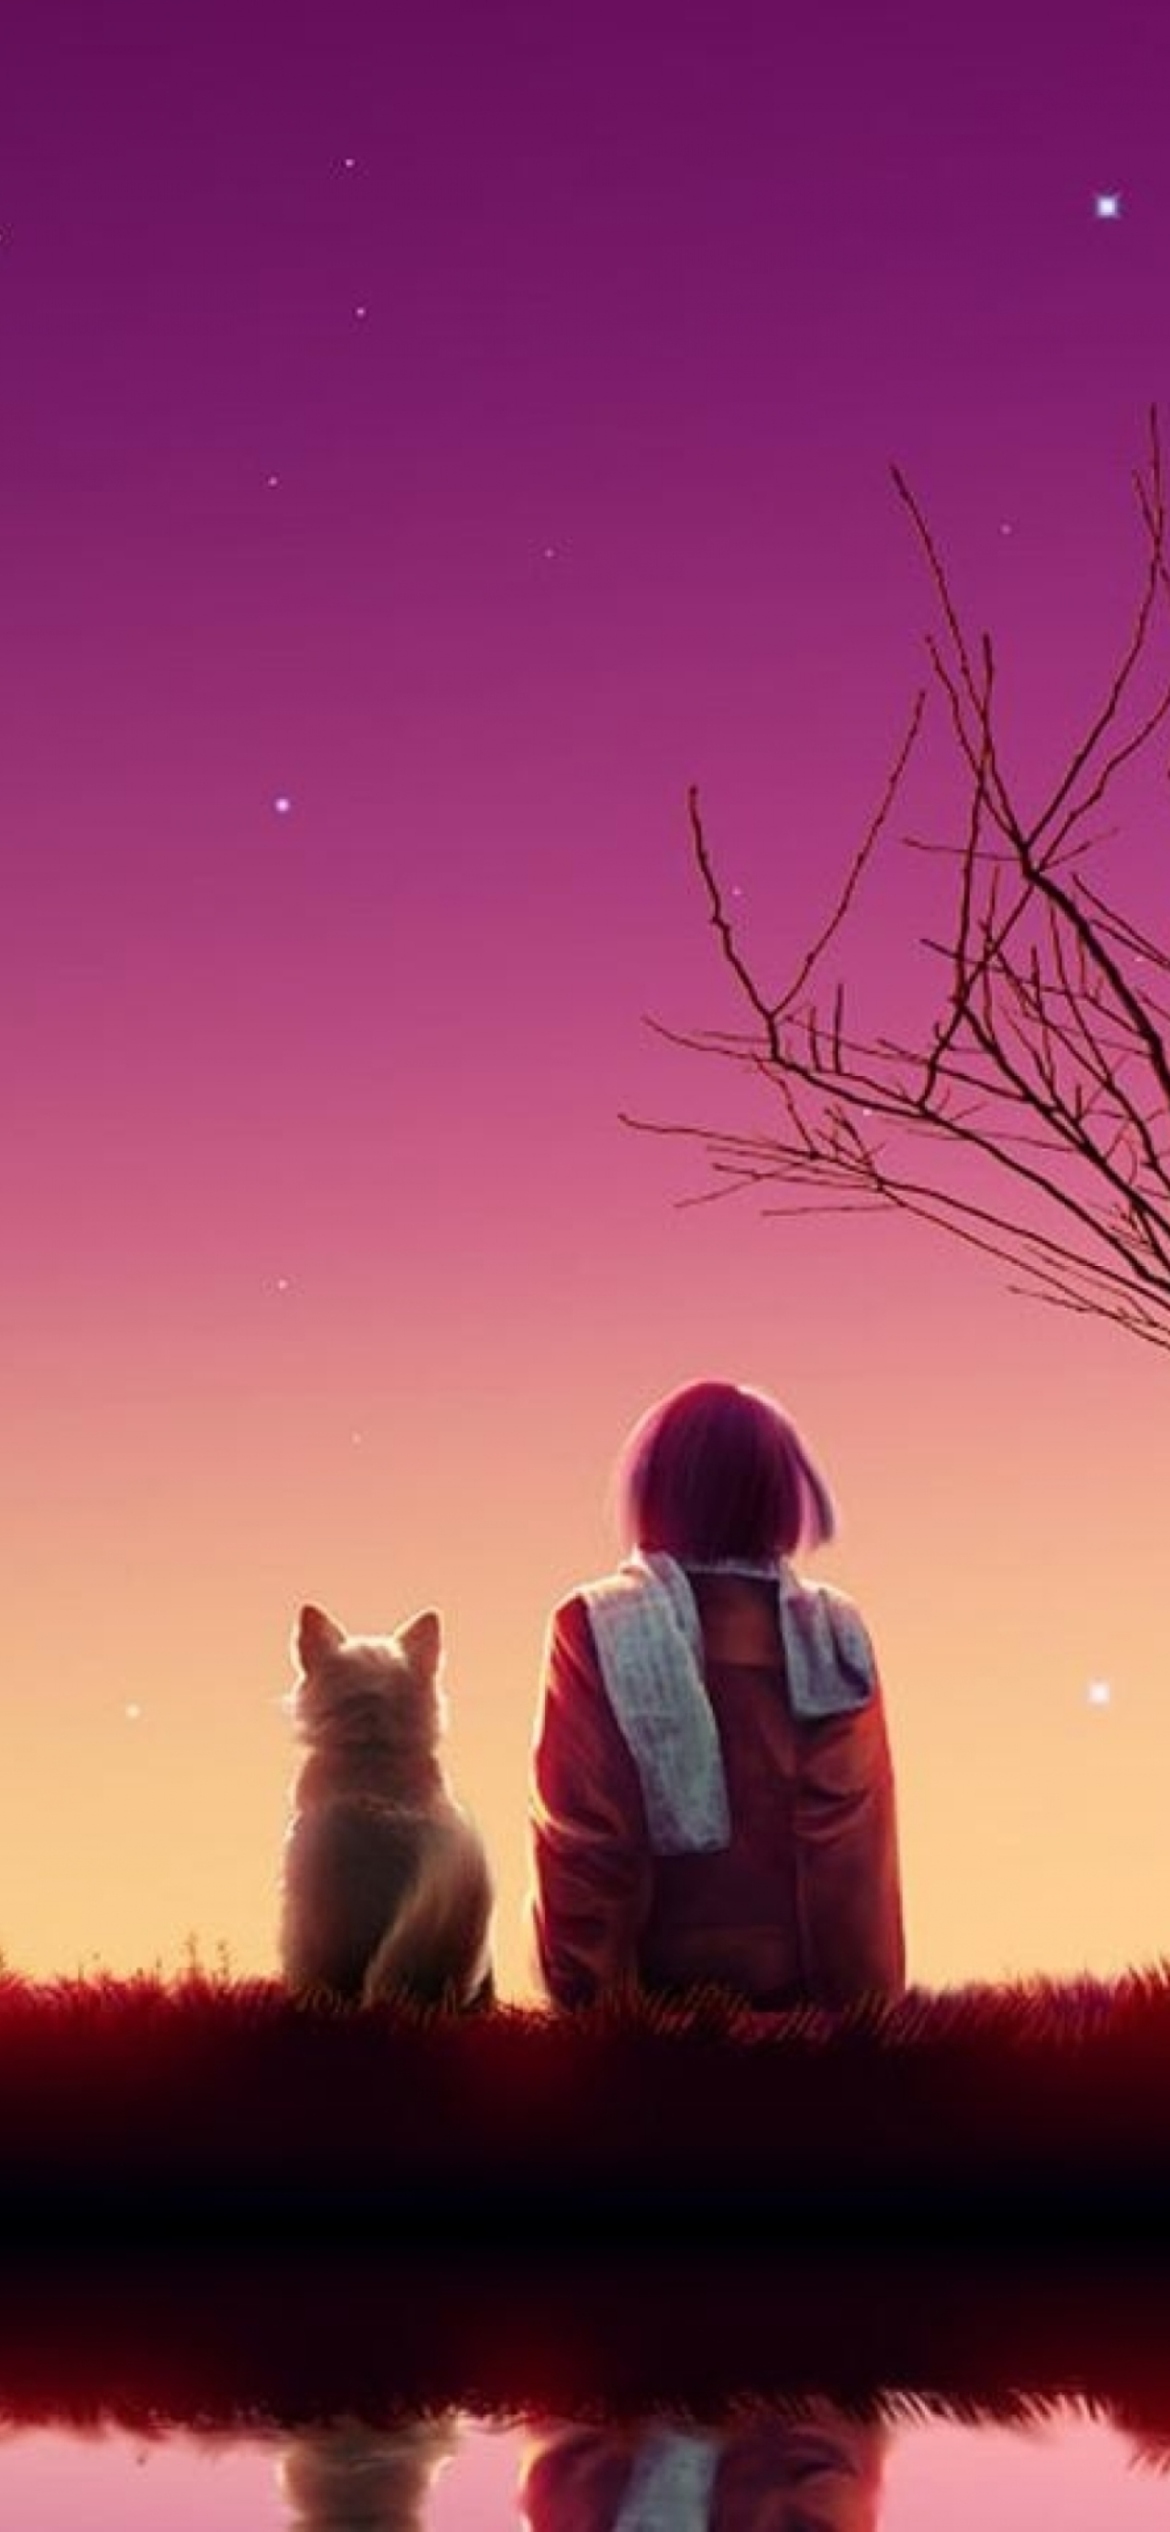 Girl And Cat Looking At Pink Sky wallpaper 1170x2532